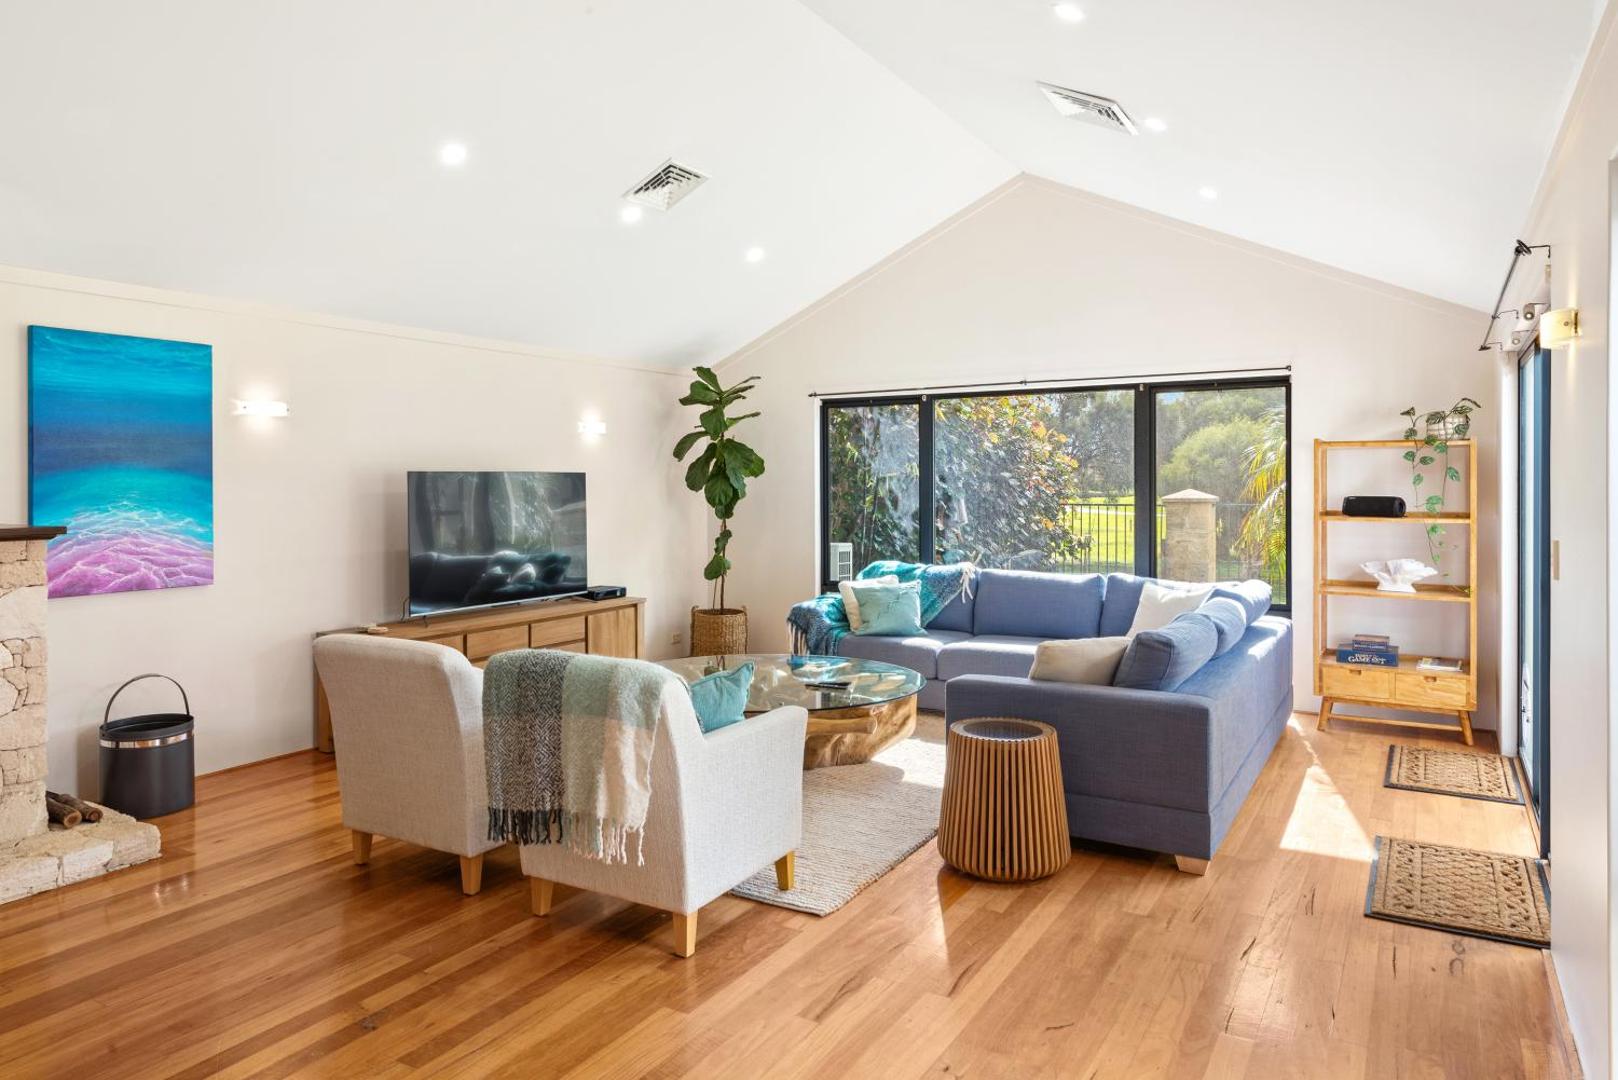 Twin Peaks – Luxury living in the heart of Dunsborough